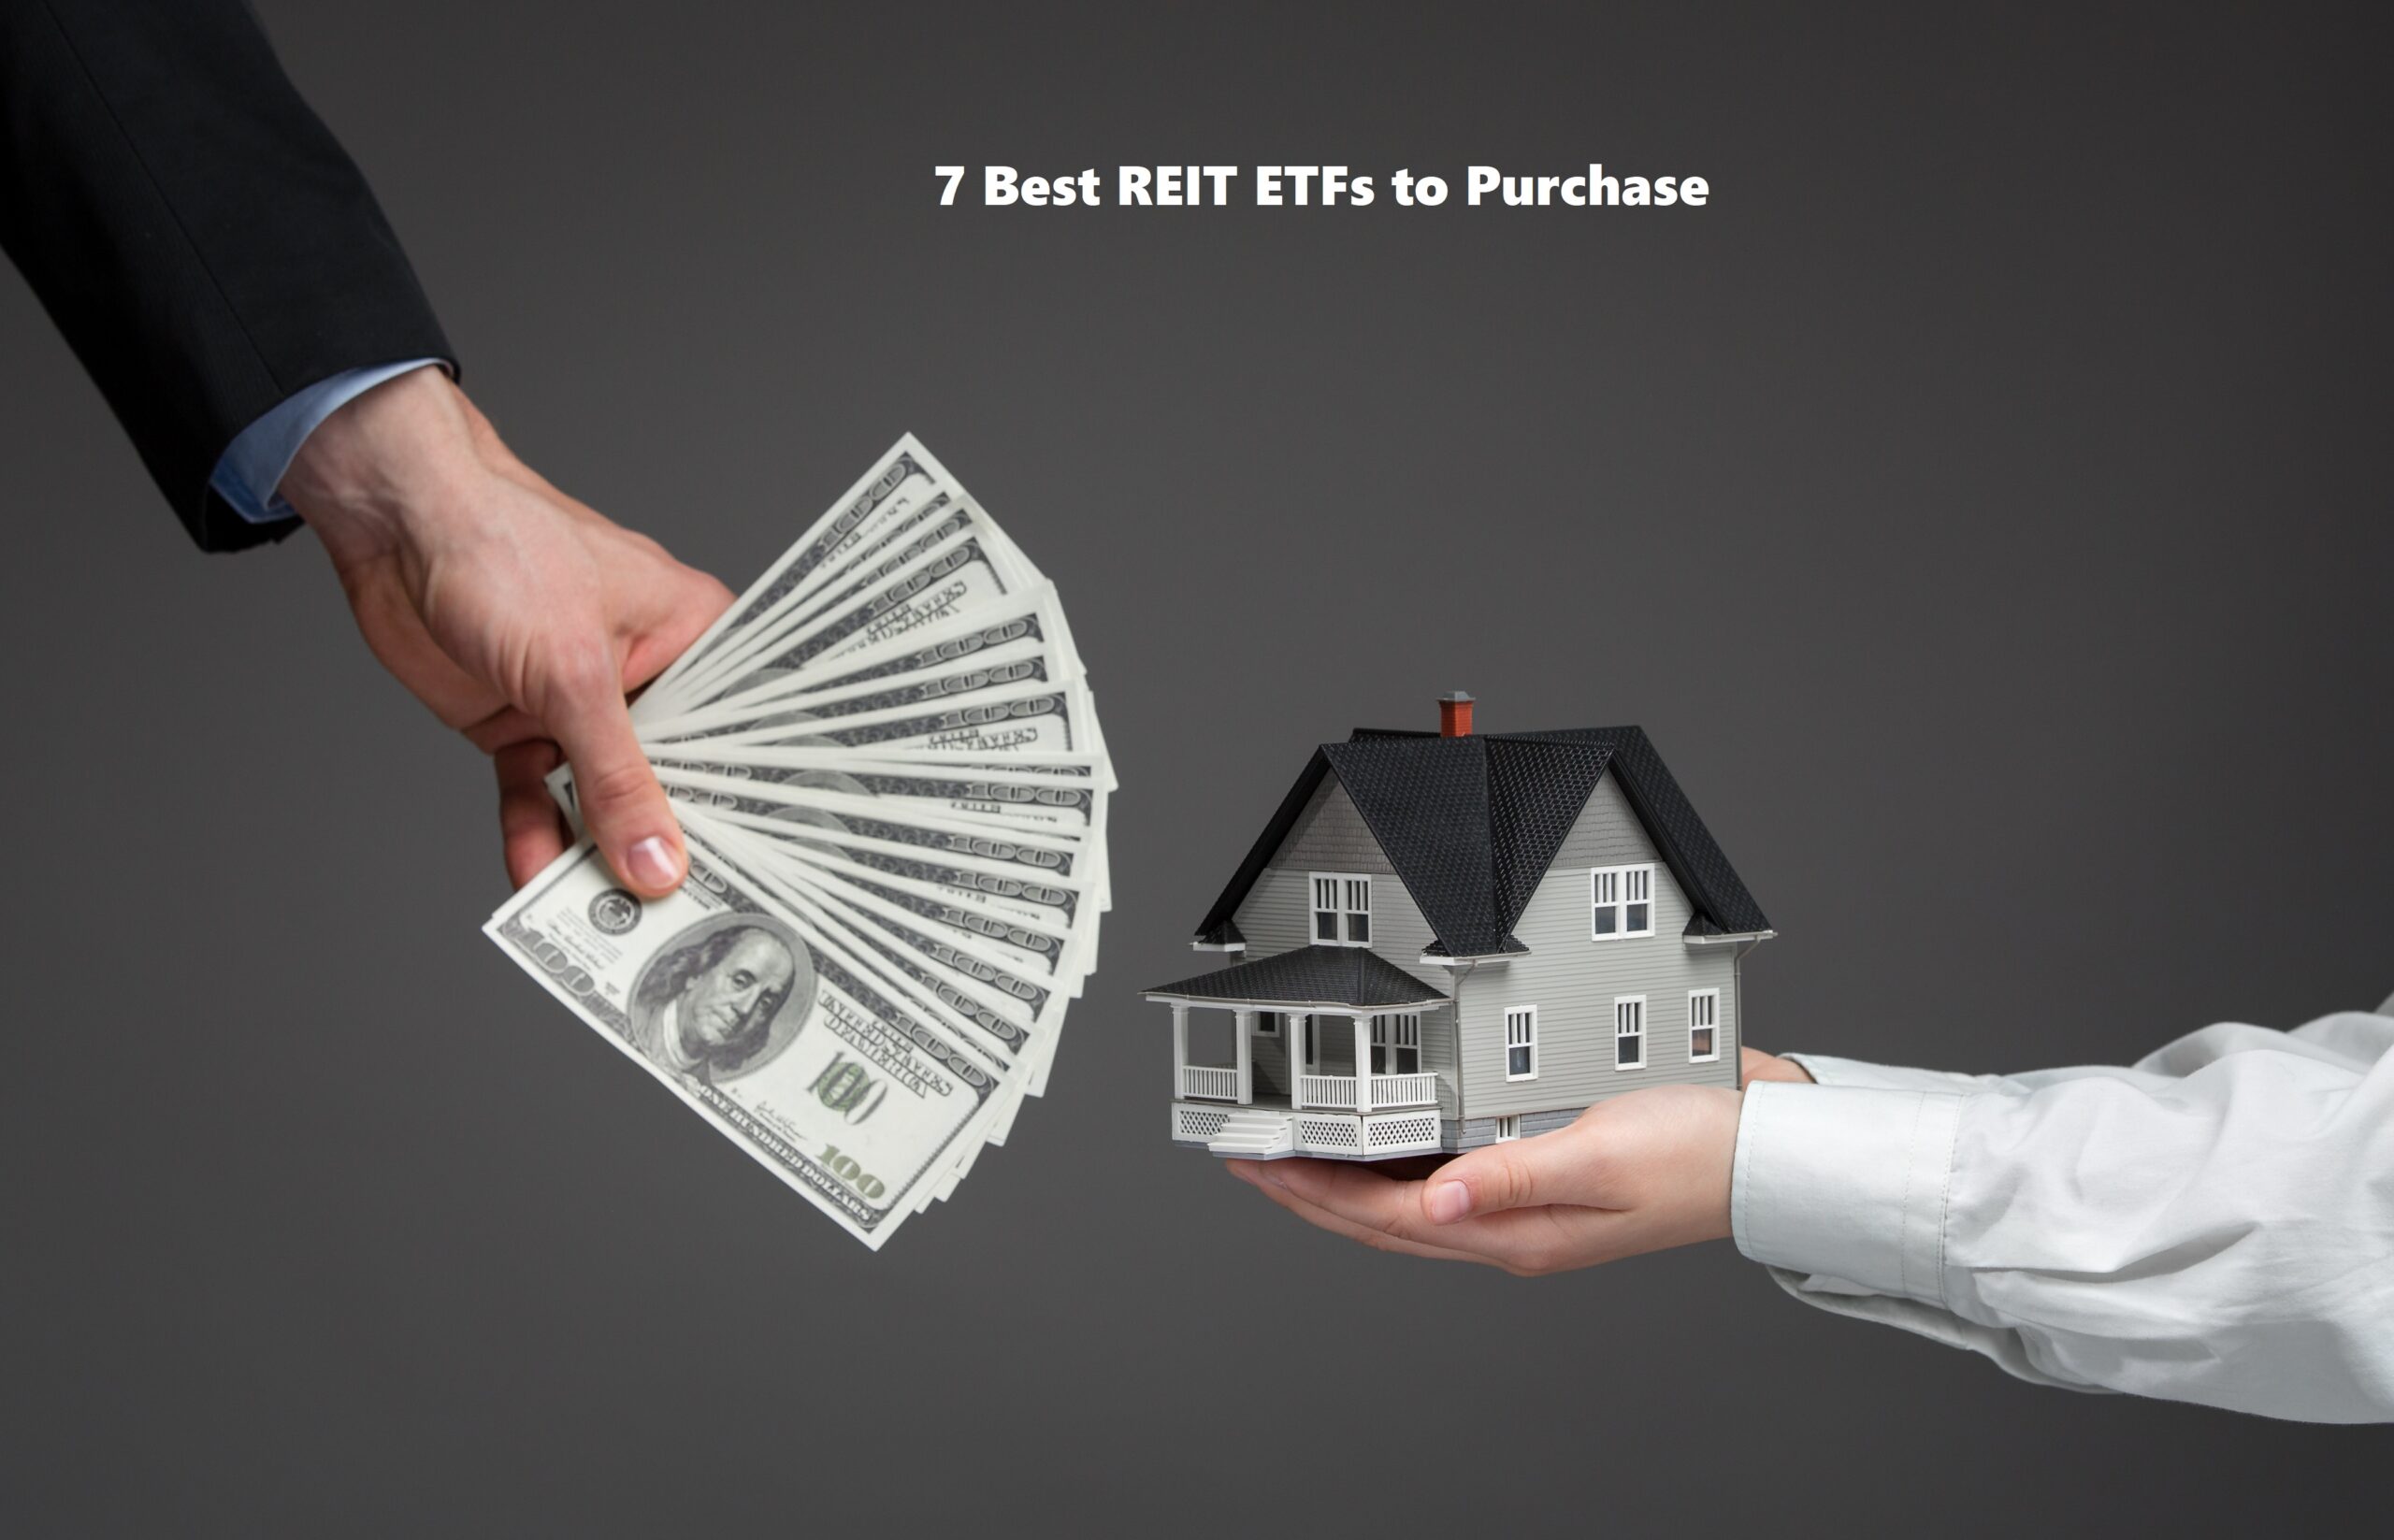 How to 7 Best REIT ETFs to Purchase